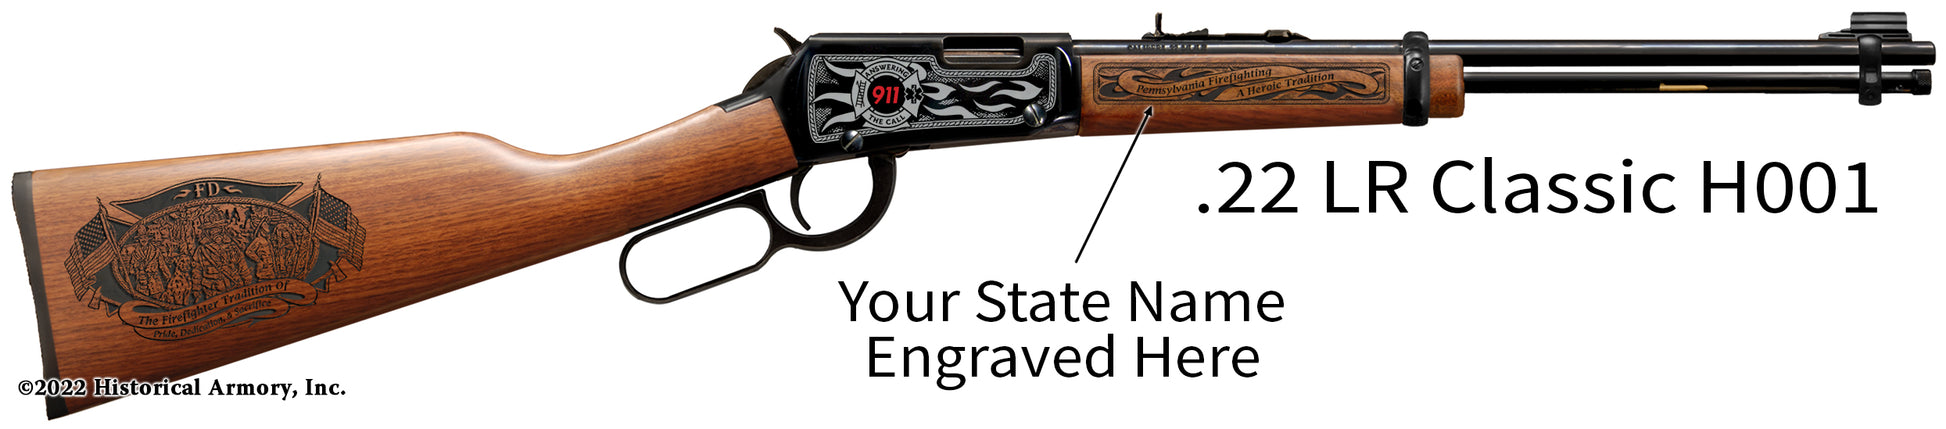 Firefighter Heroic Tradition Engraved Rifle Limited Edition